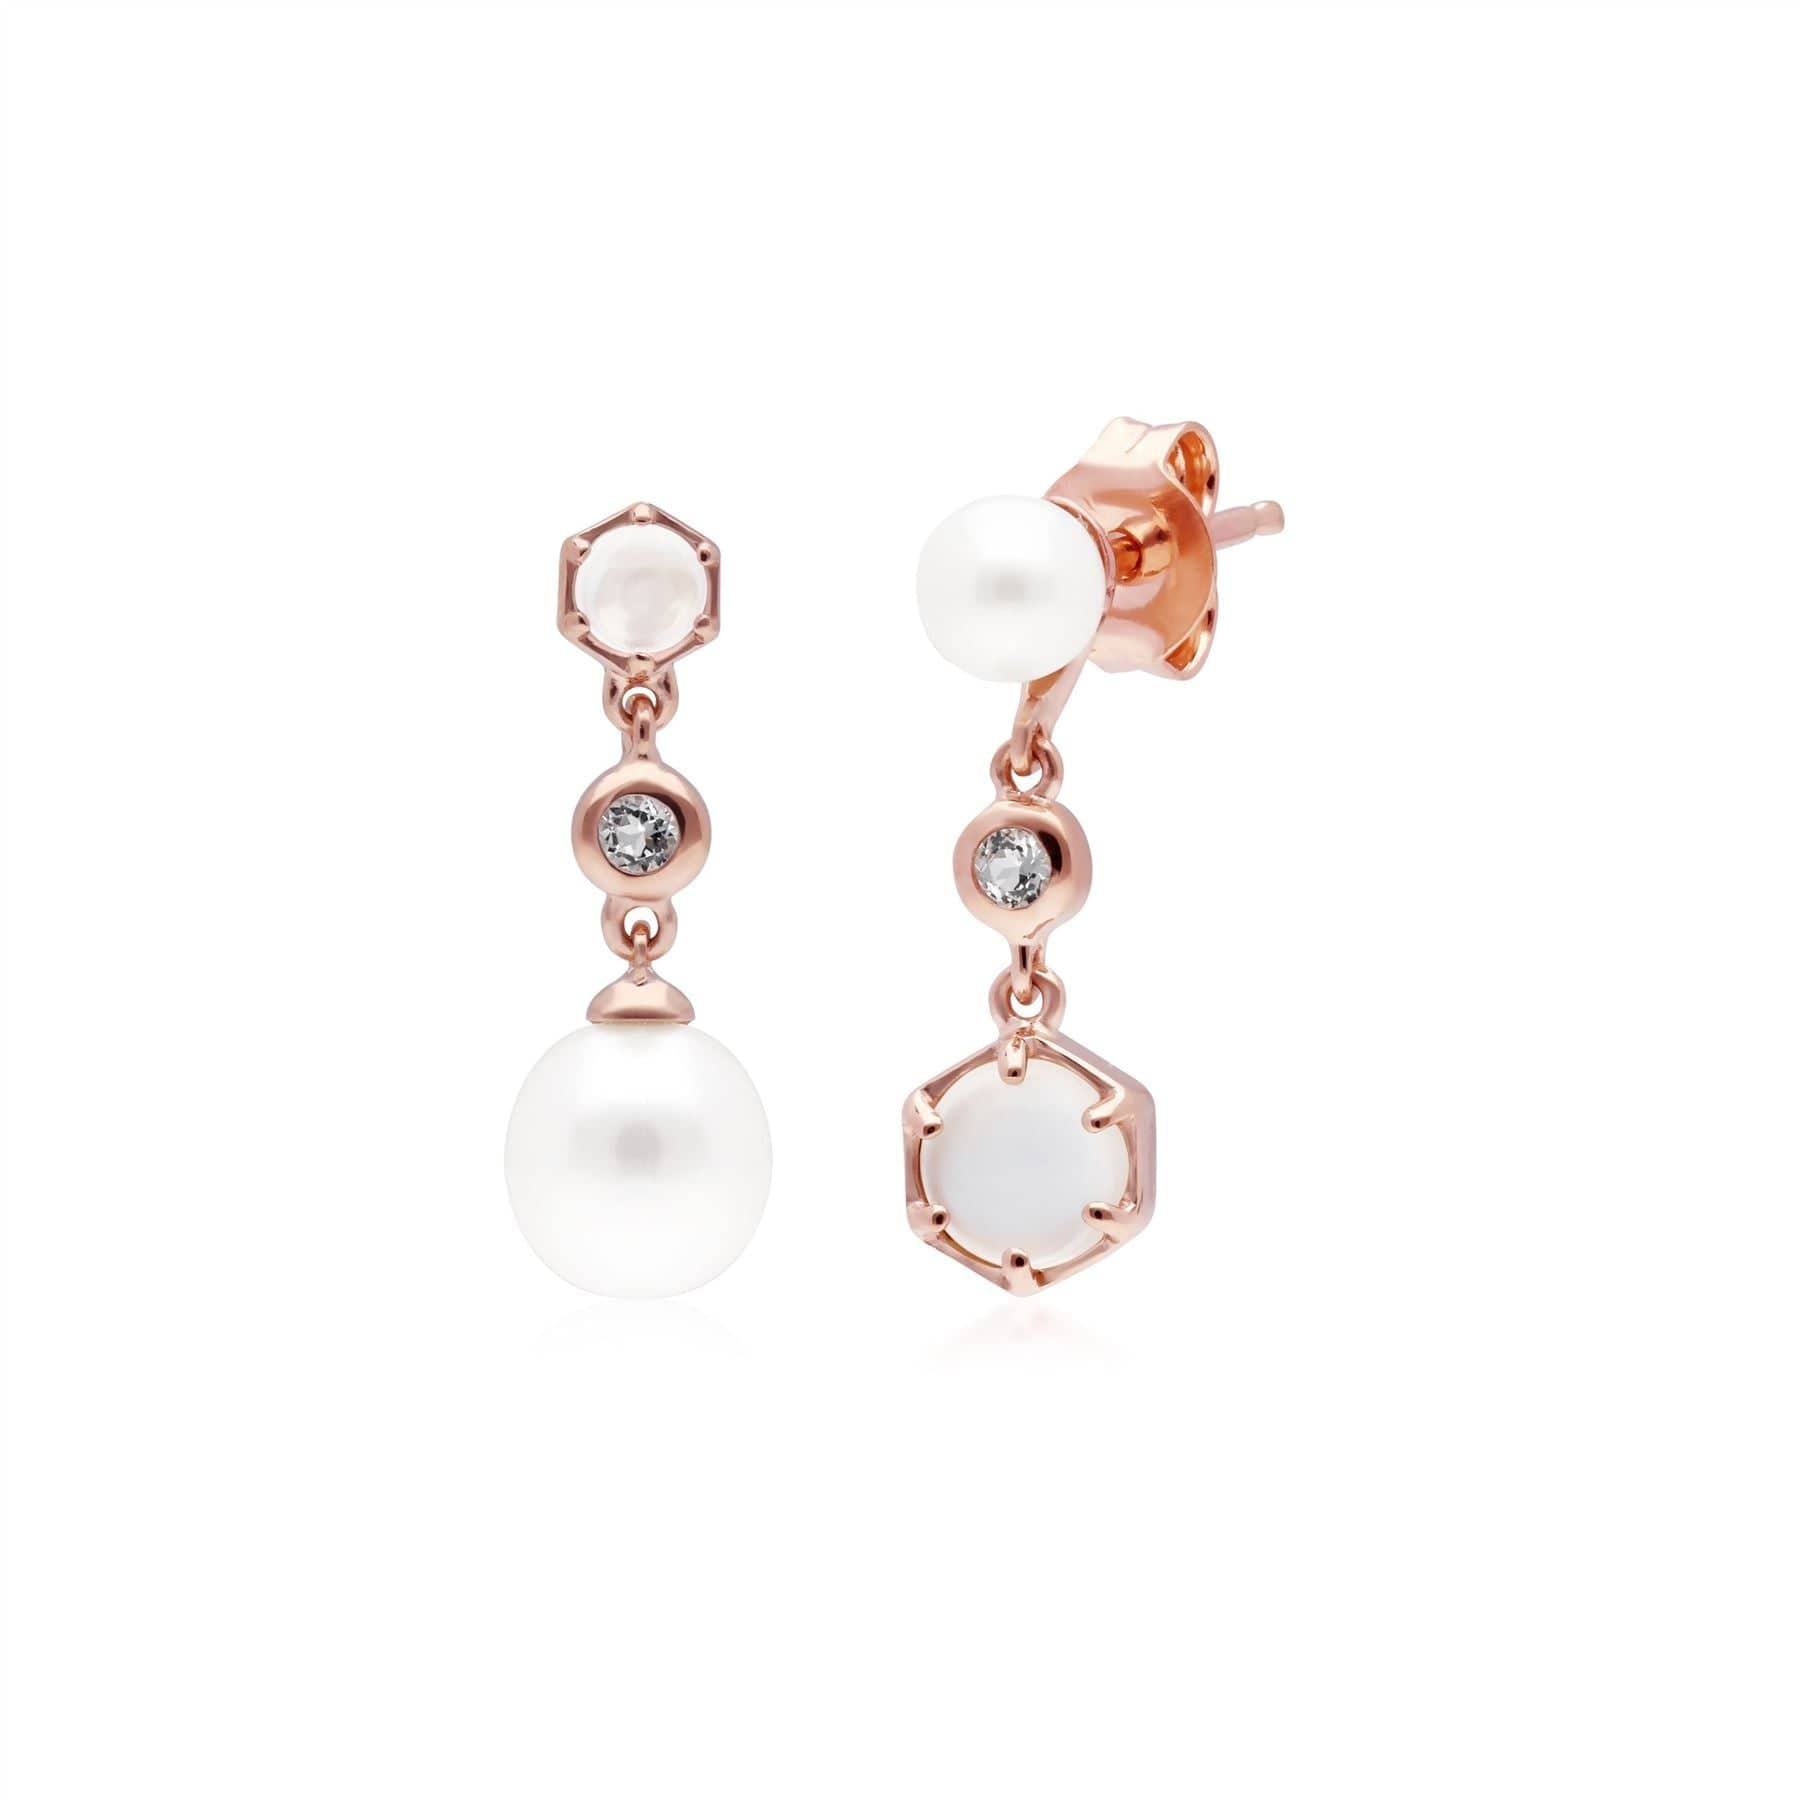 Modern Pearl, Moonstone & Topaz Mismatched Drop Earrings in Rose Gold Plated Silver - Gemondo